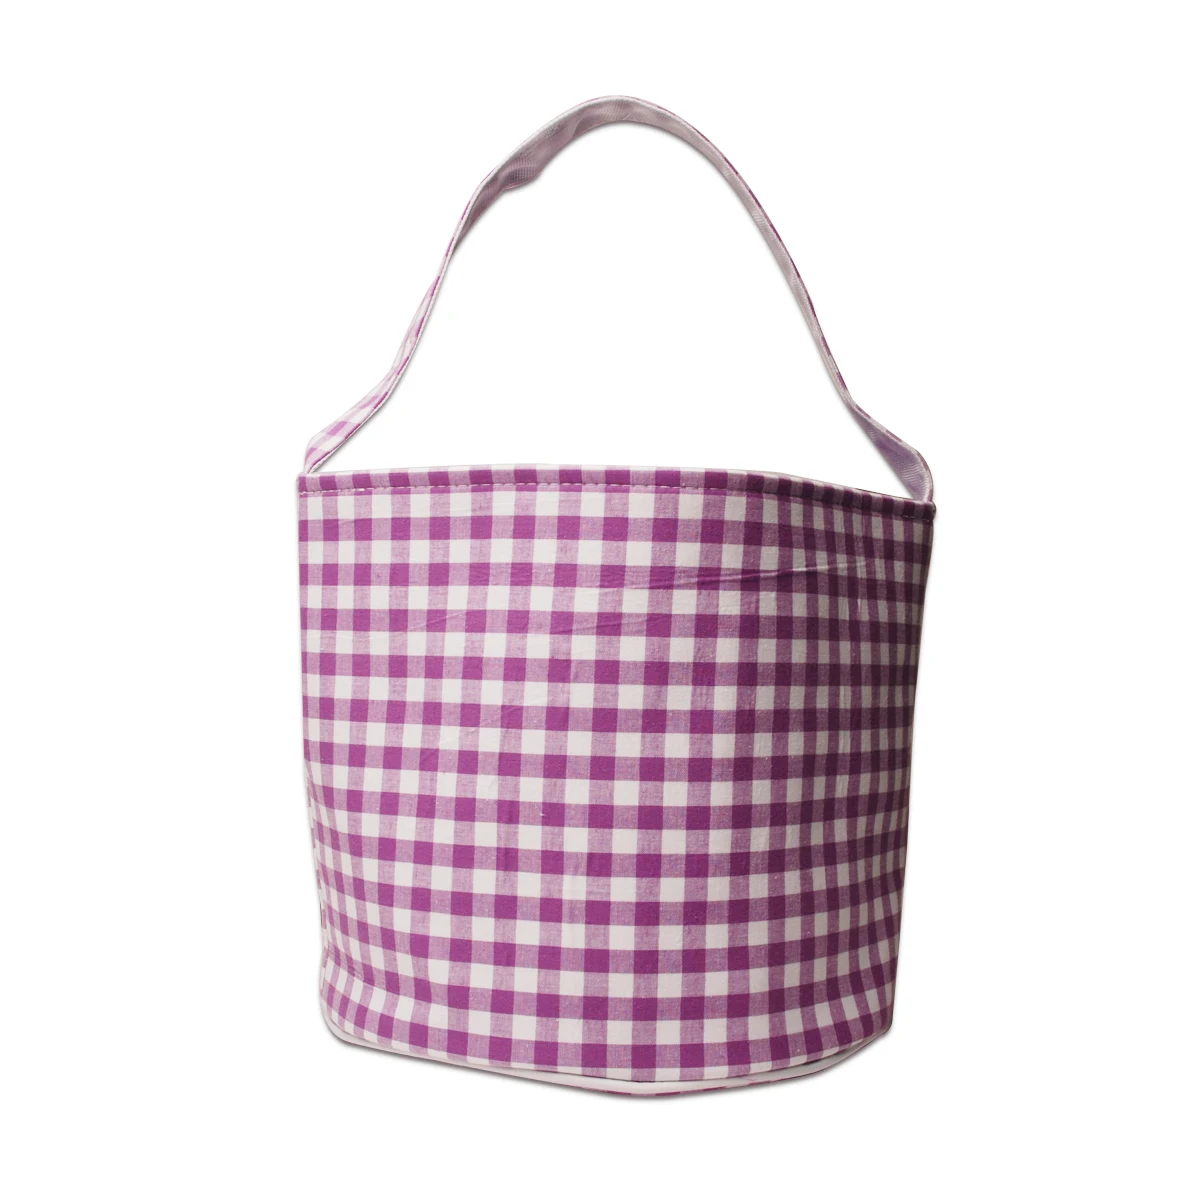 

2021 Amazon Hot Large Seersucker Easter Plaid Stripes Bucket Tote Bag Easter Egg Candy Basket for kids, As pictures